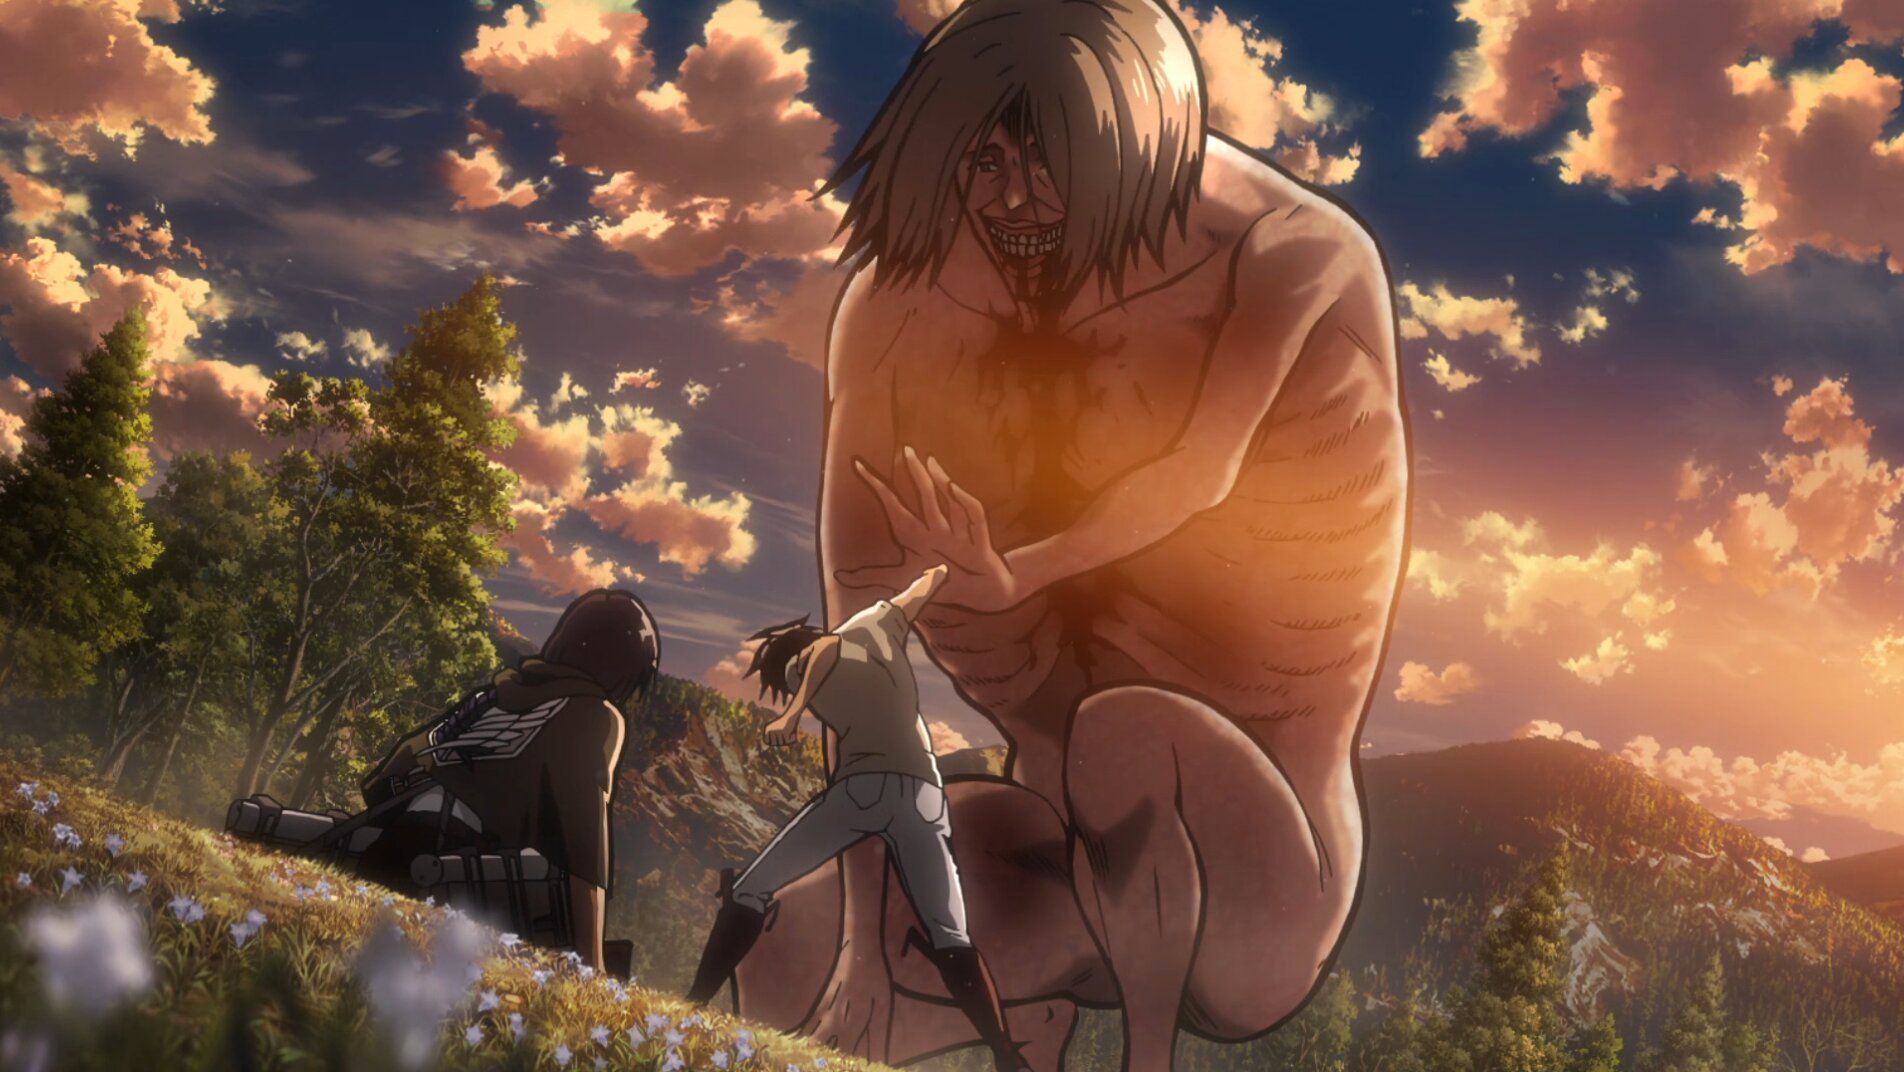 10 Best Things About Eren Yeager